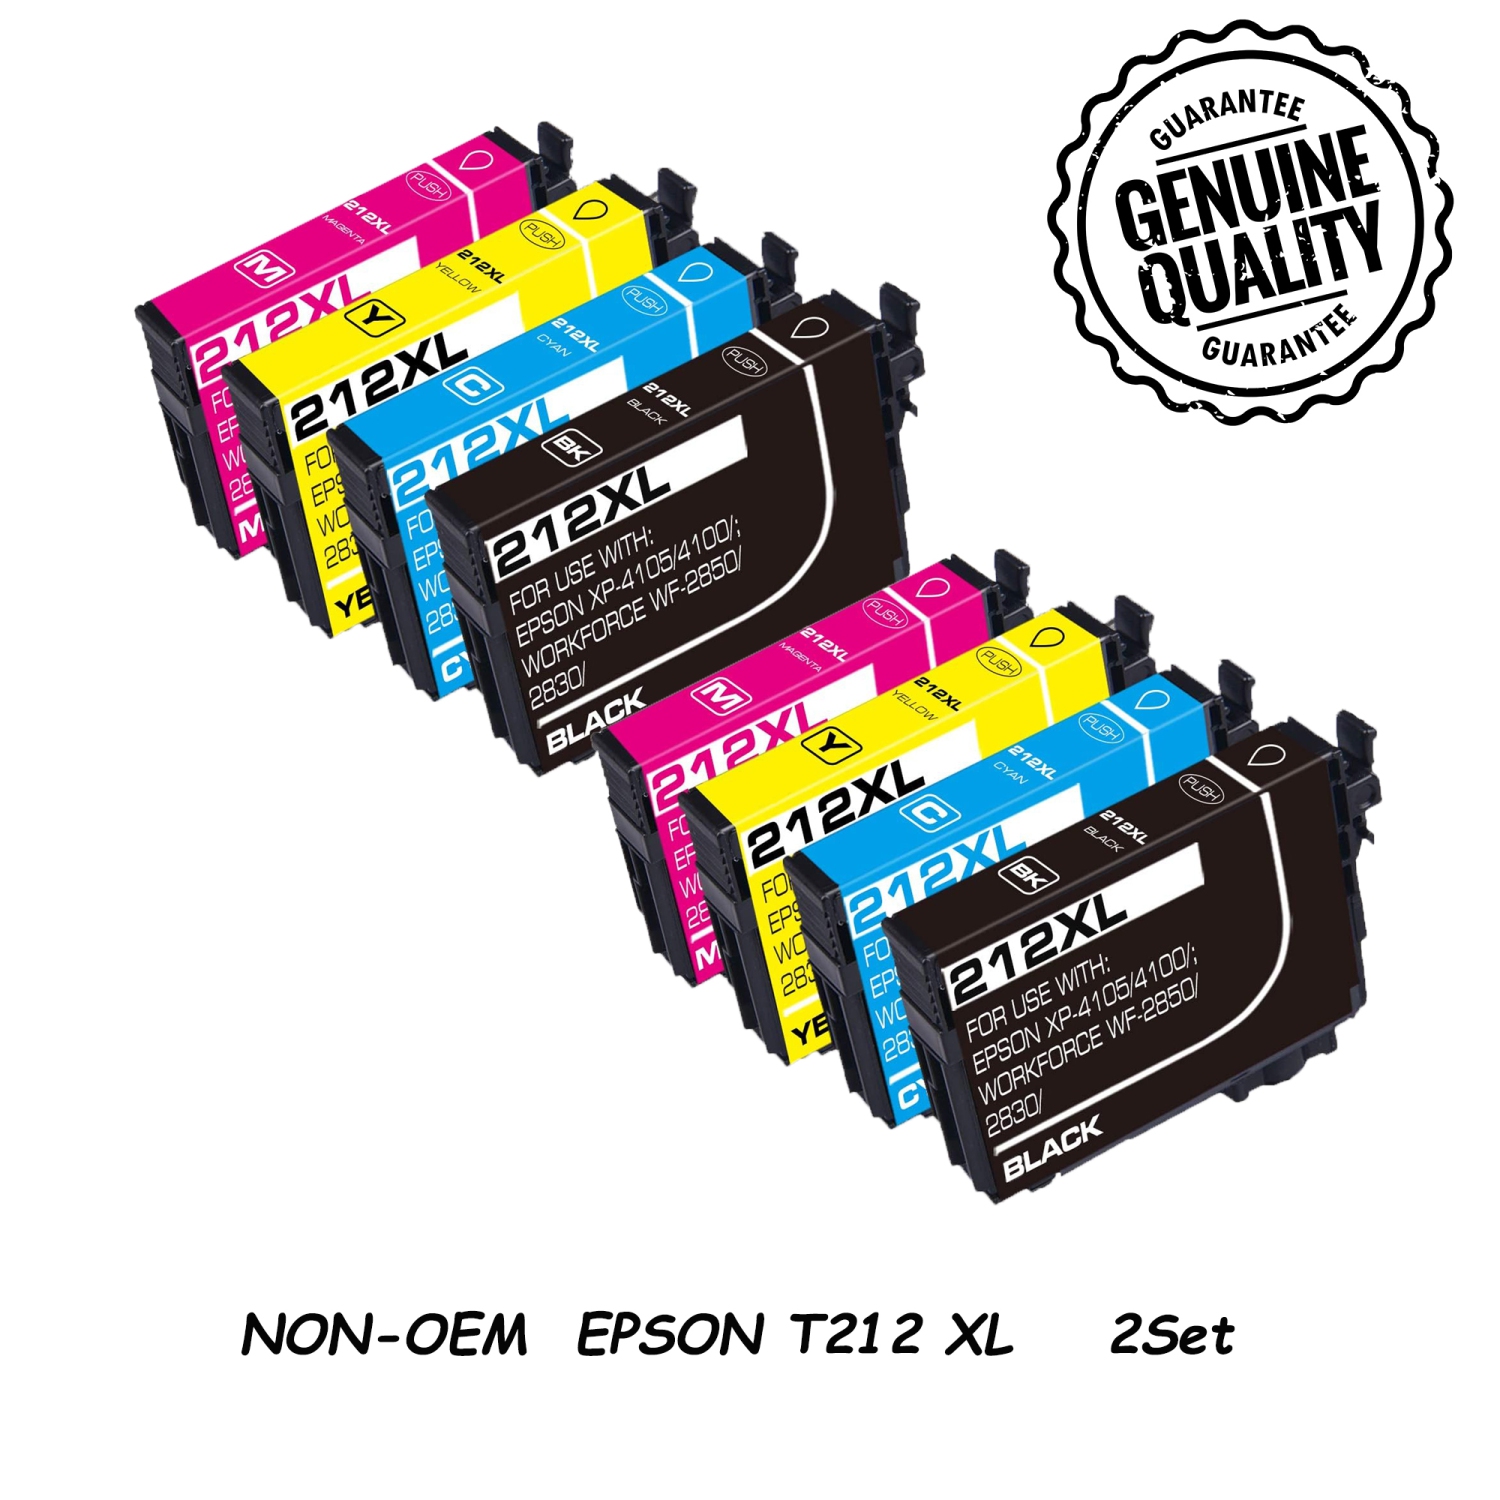 [New Chip] 2Set Compatible Ink Cartridge Replacement for Epson T212 212 XL to use with Expression Home XP-4100 , EpsonWorkForce WF-2830 , WorkForce WF-2850